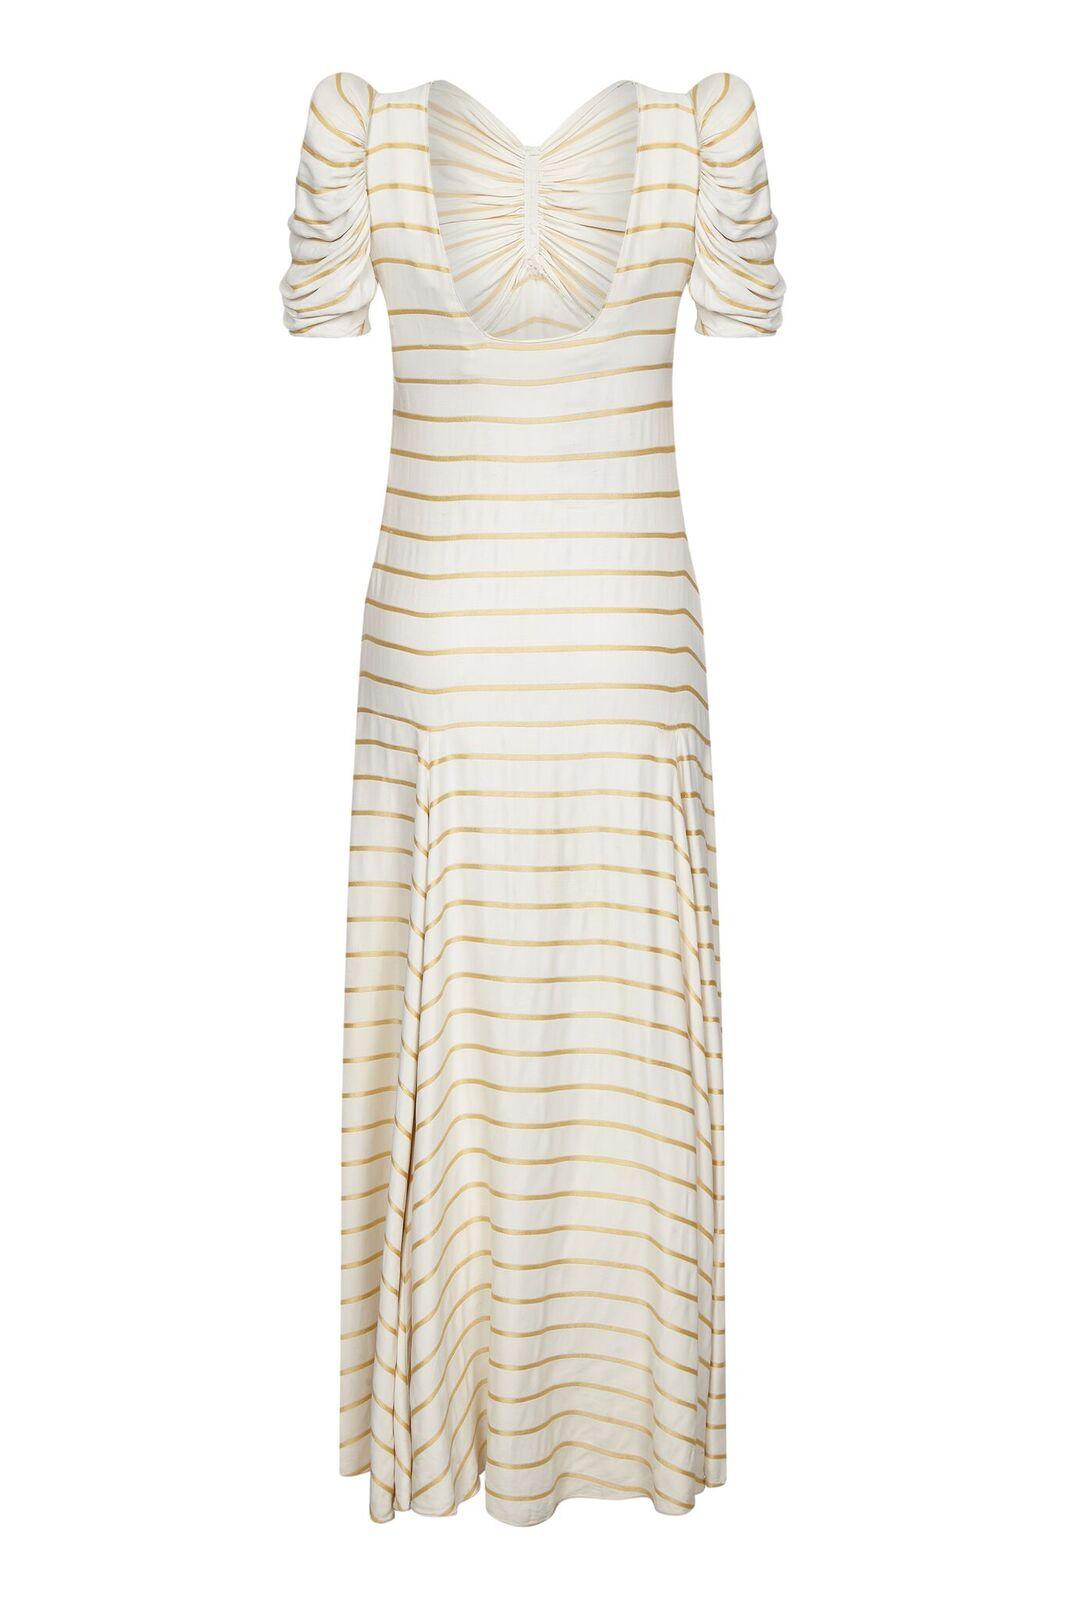 This sensational 1930s ivory silk gown with gold horizontal stripes absolutely exudes glamour and elegance. The fabric on the bodice is very finely gathered at the centre, creating a wonderful sunburst to flatter the bust. This dramatic feature is